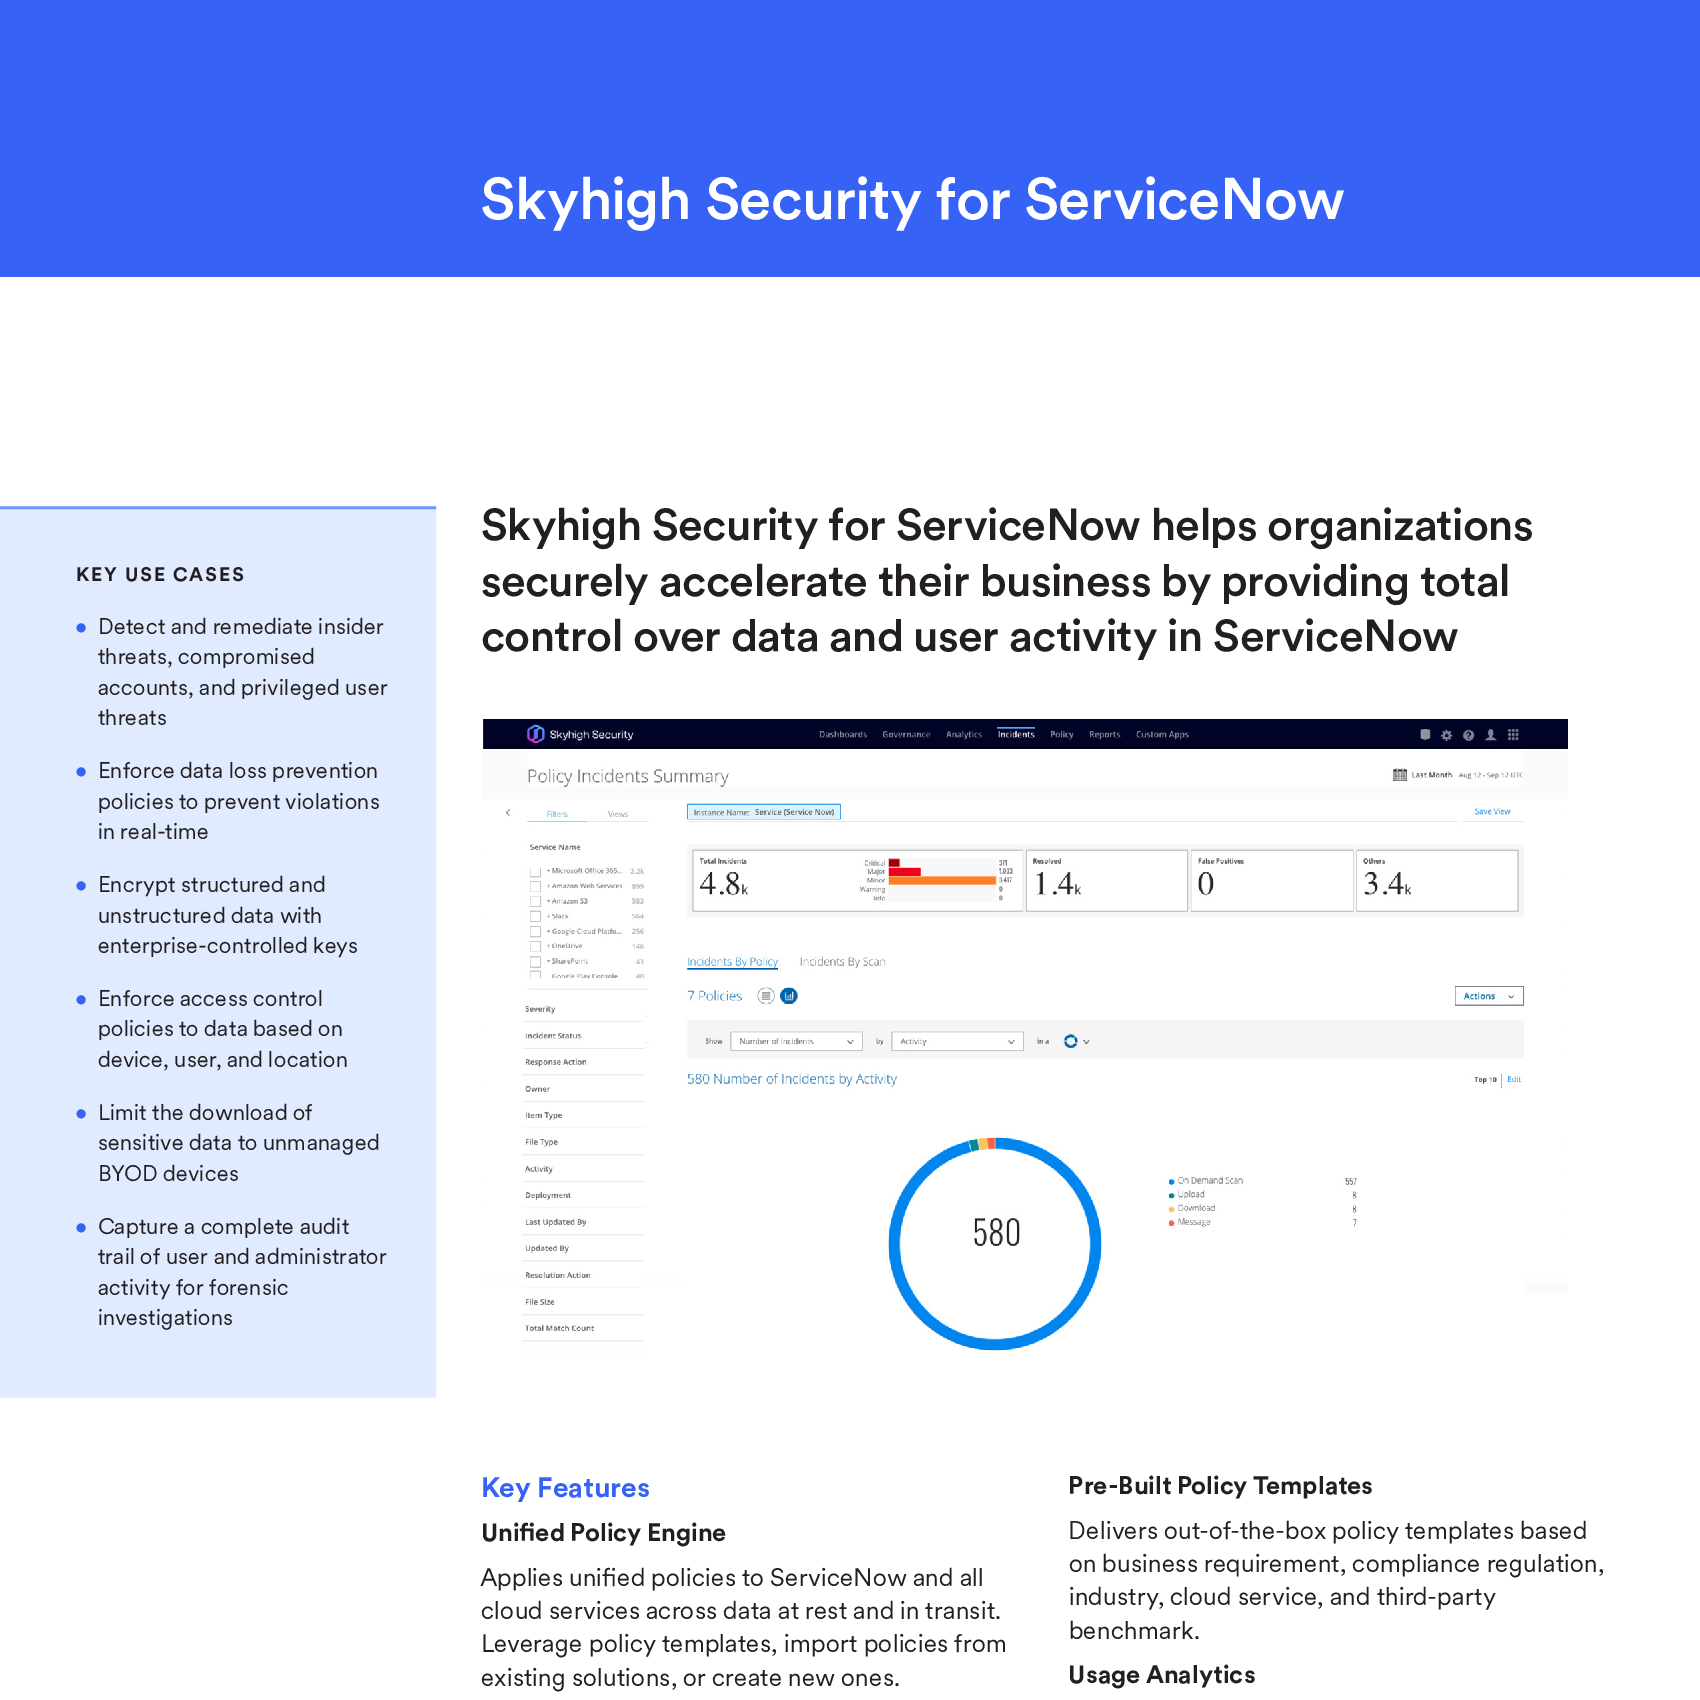 ds-skyhigh-for-servicenow